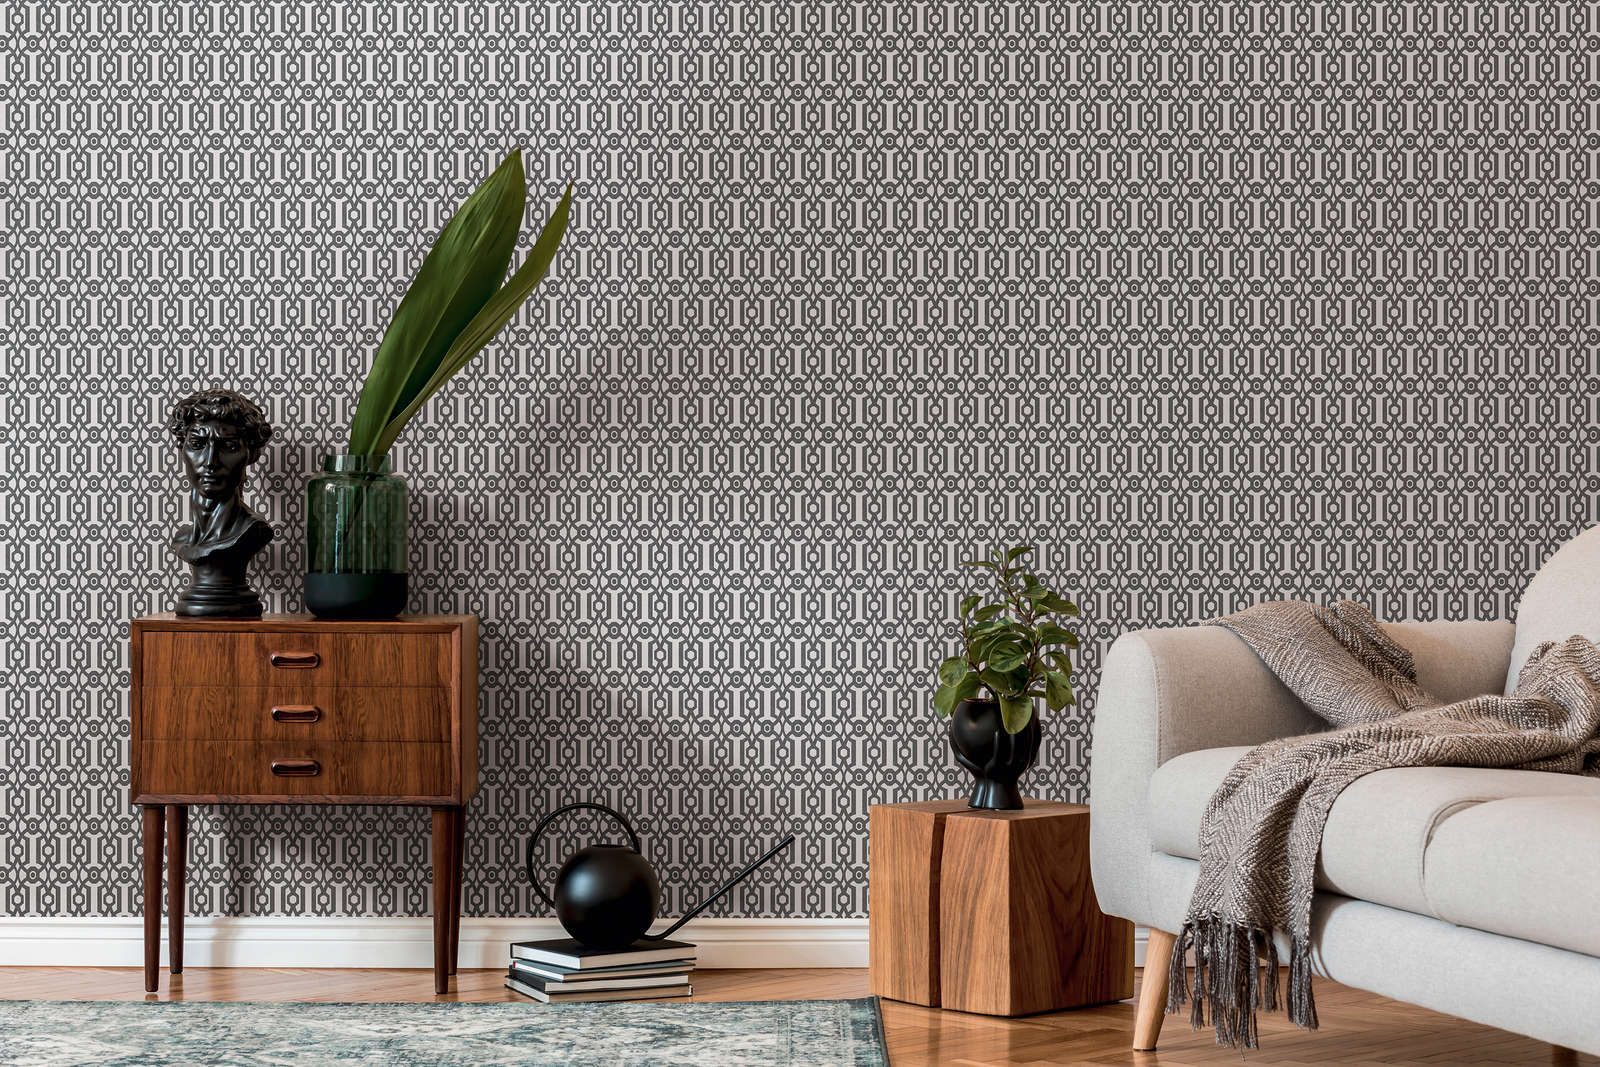             Non-woven wallpaper with graphic pattern modern - black, white
        